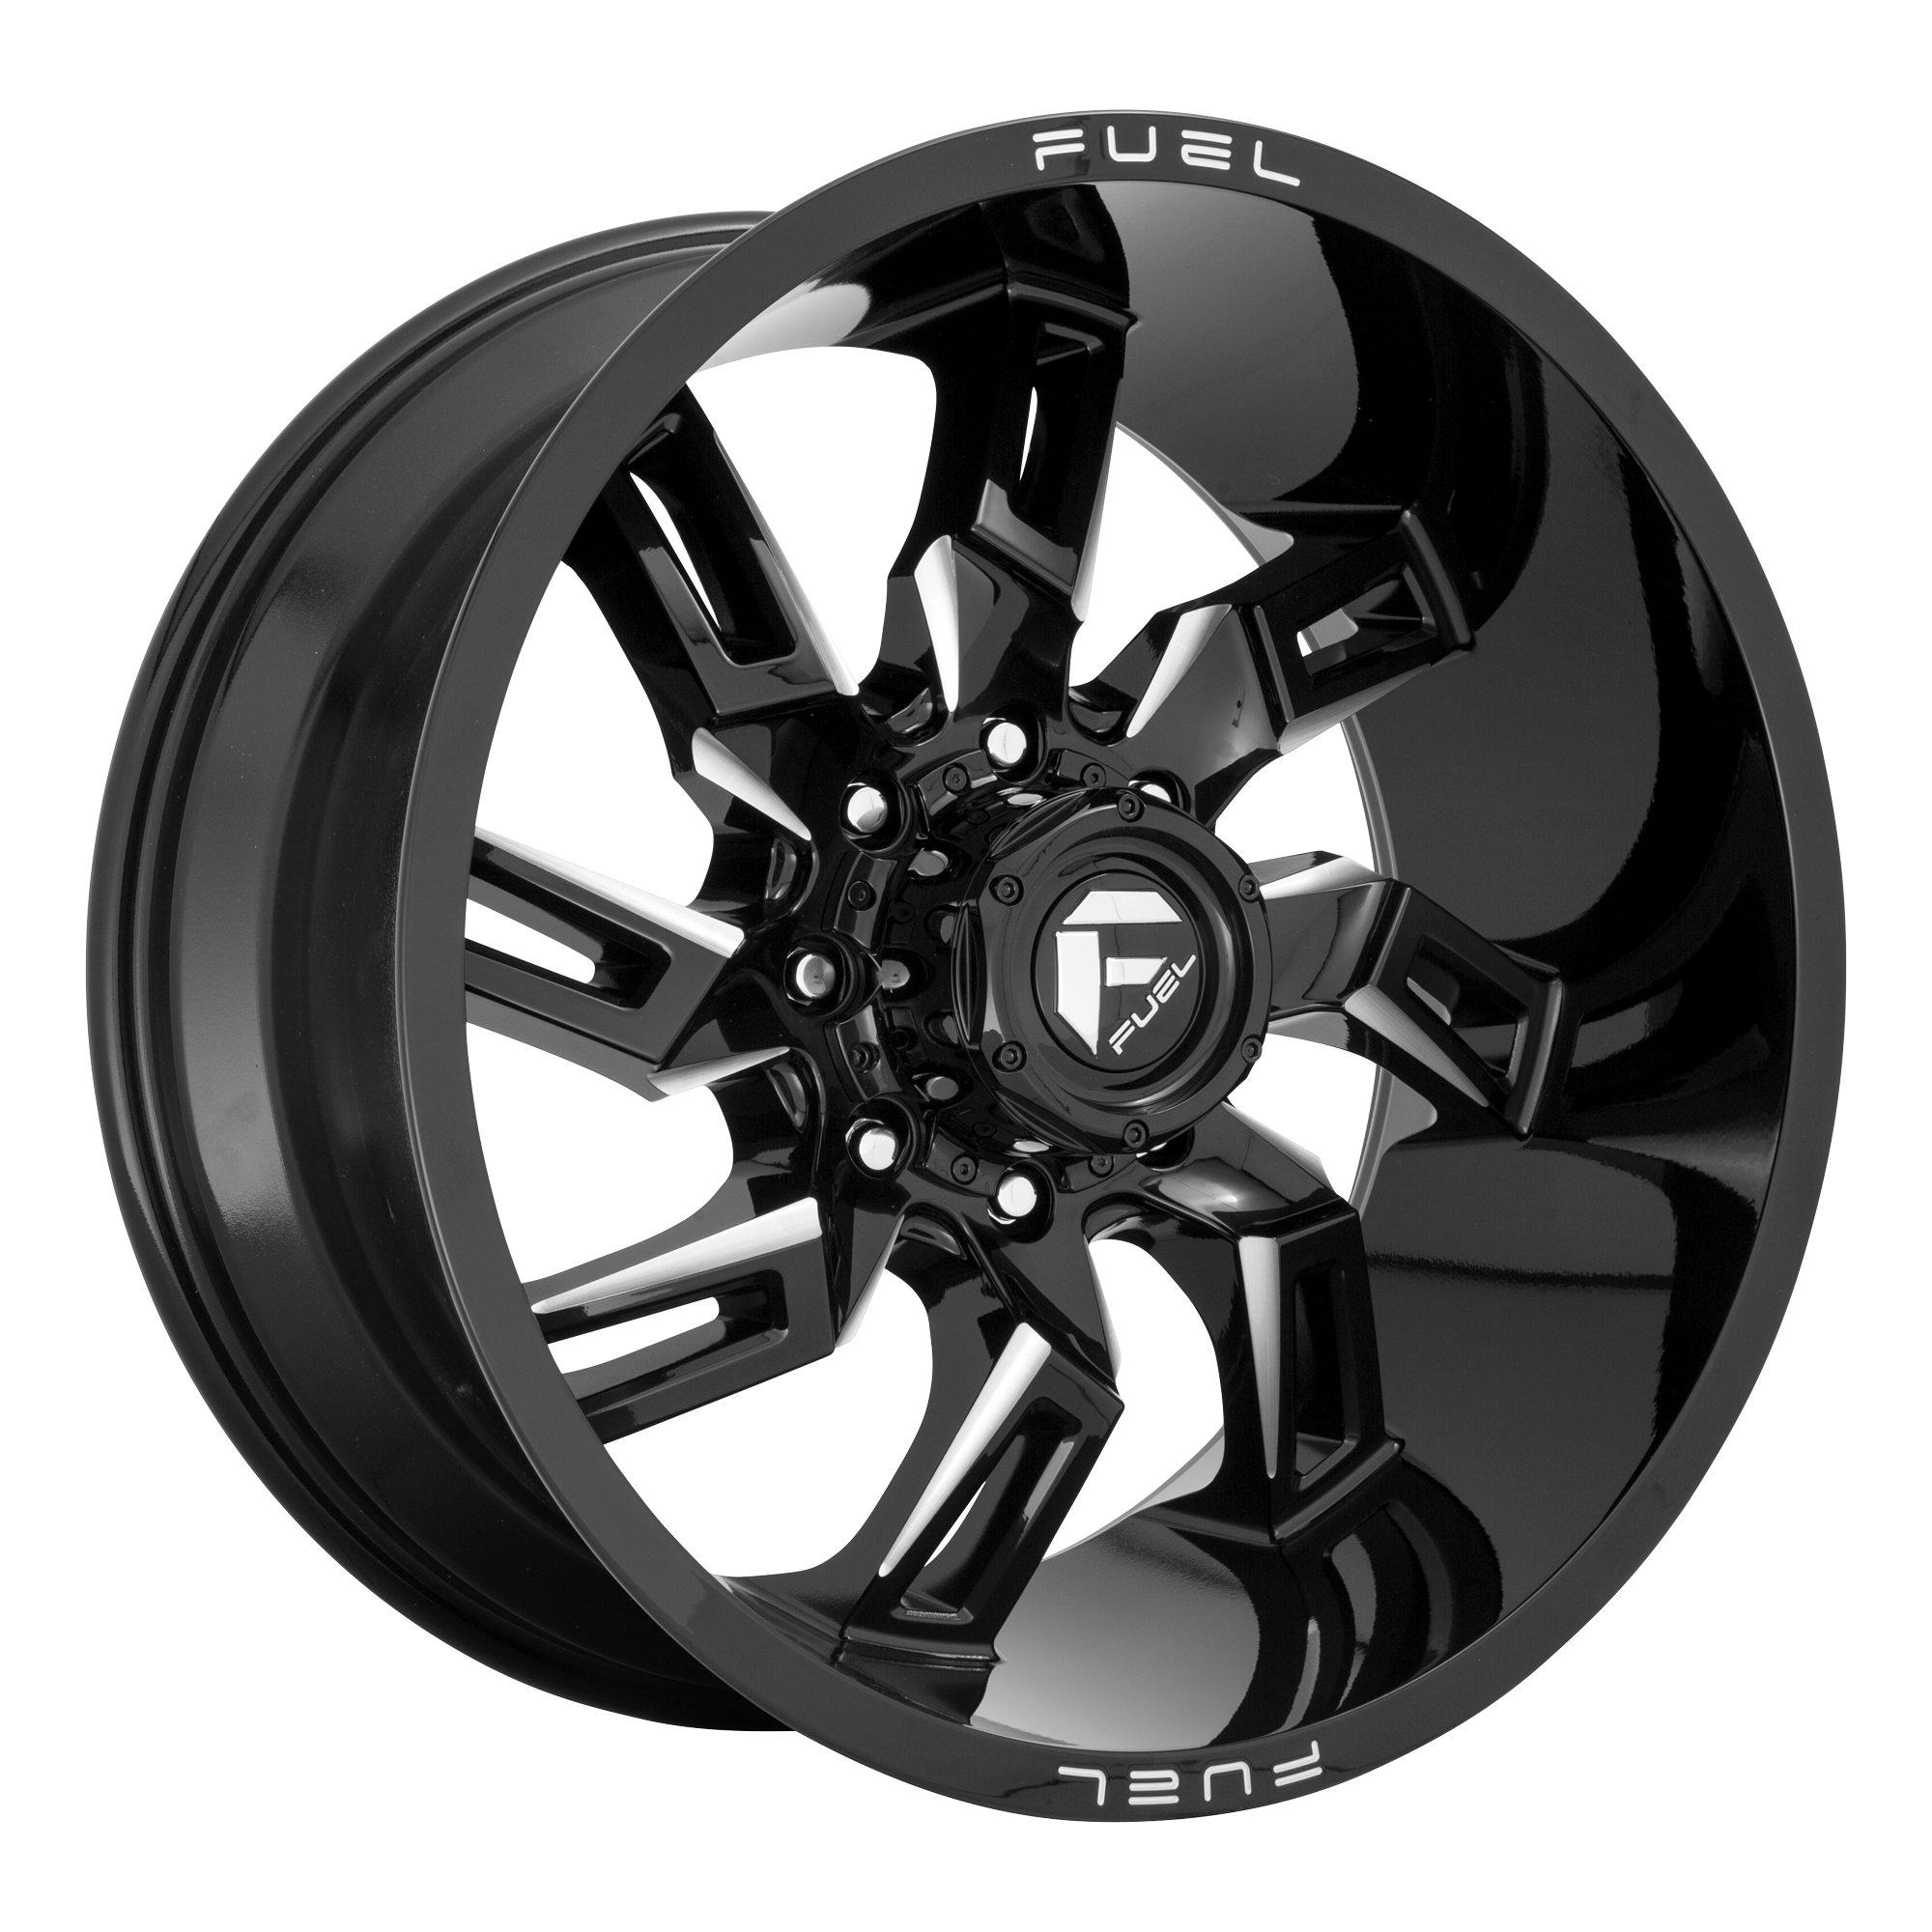 LOCKDOWN 20x10 5x127.00 GLOSS BLACK MILLED (-18 mm) - Tires and Engine Performance